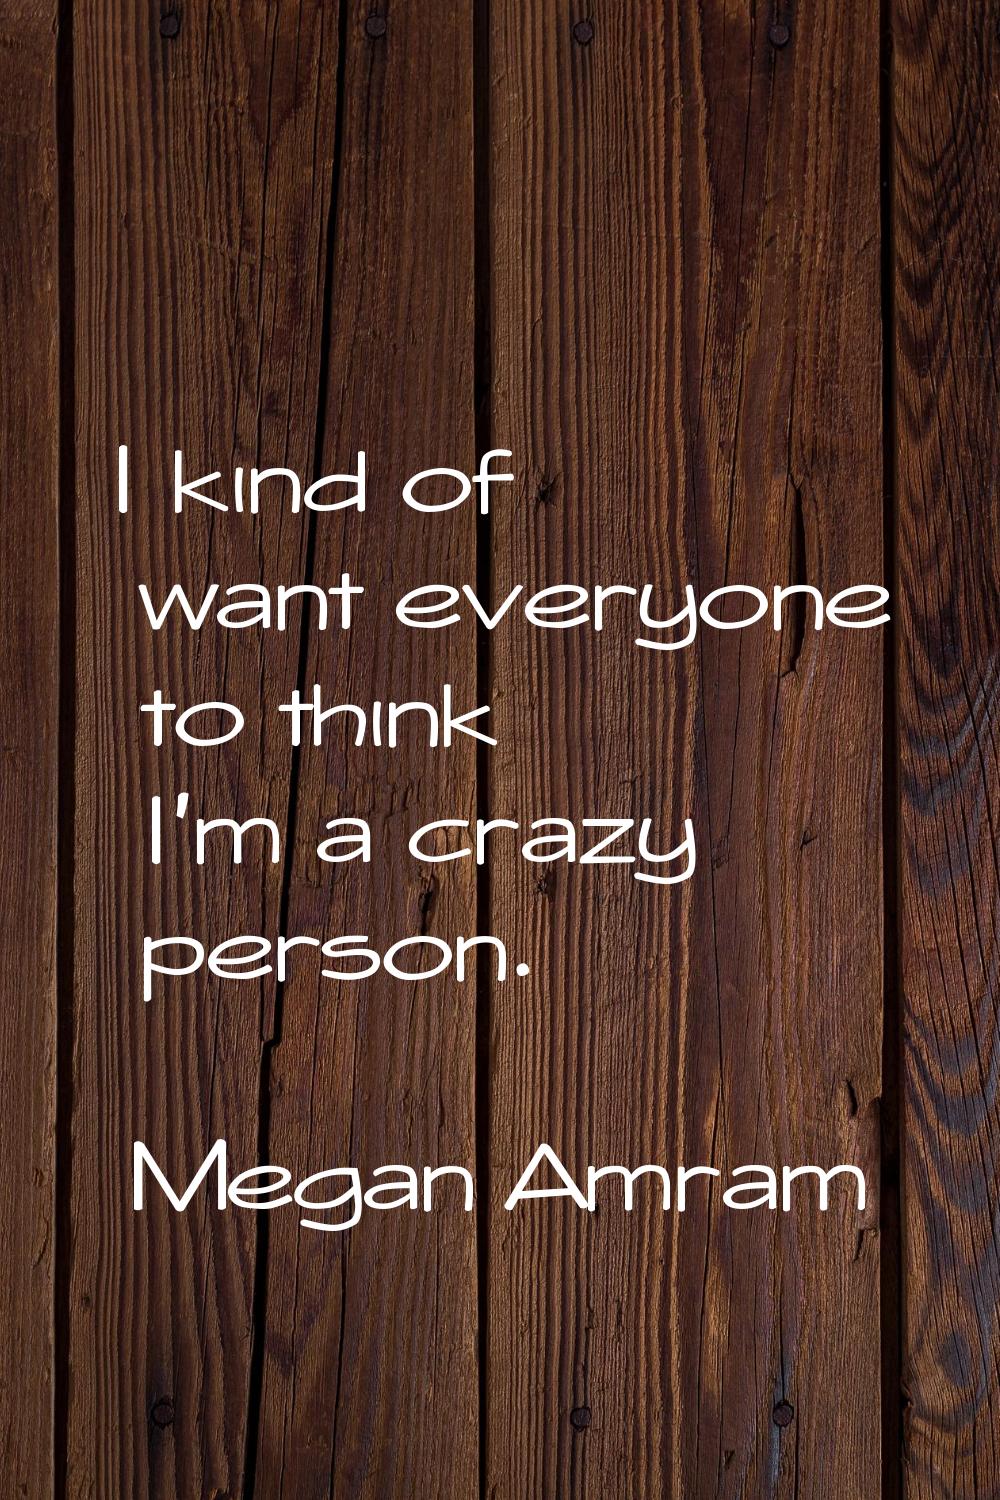 I kind of want everyone to think I'm a crazy person.